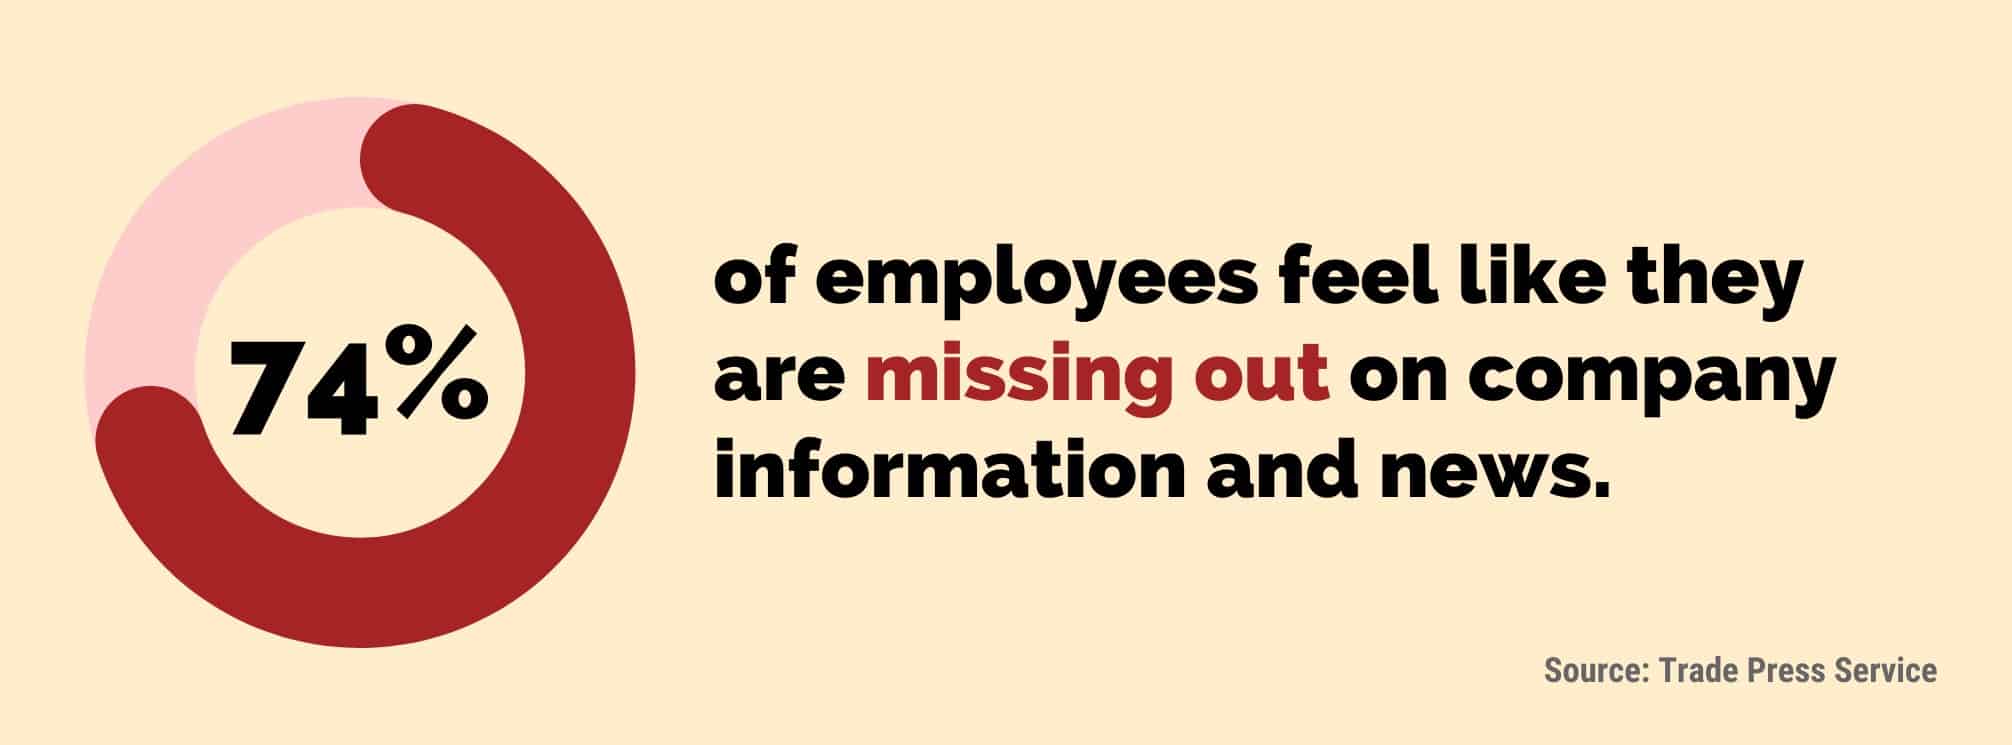 graphic to show a data point: 74% of employees feel like they are missing out on company information and news. Source: Trade Press Service